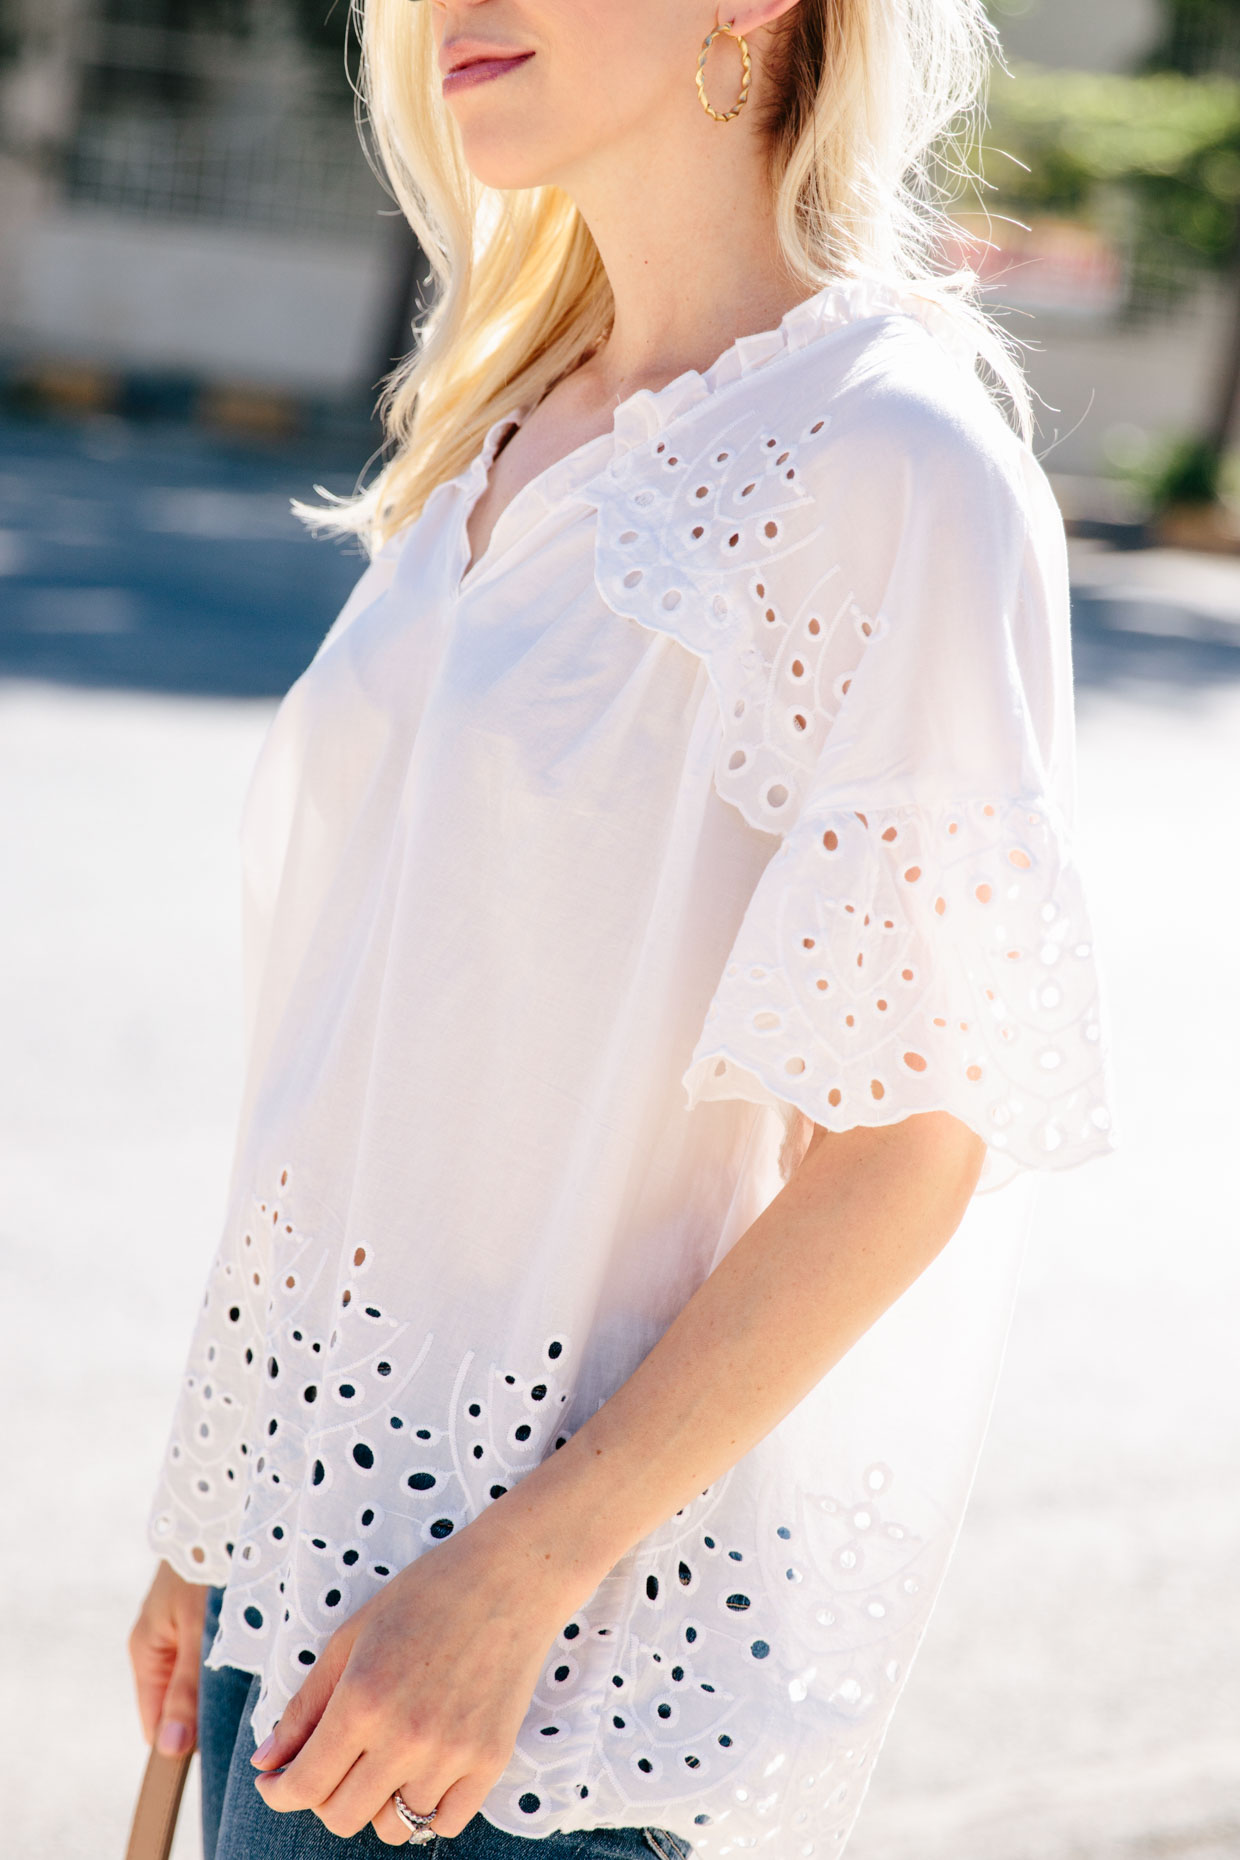 Cute white eyelet blouse for summer with Chanel sunglasses and